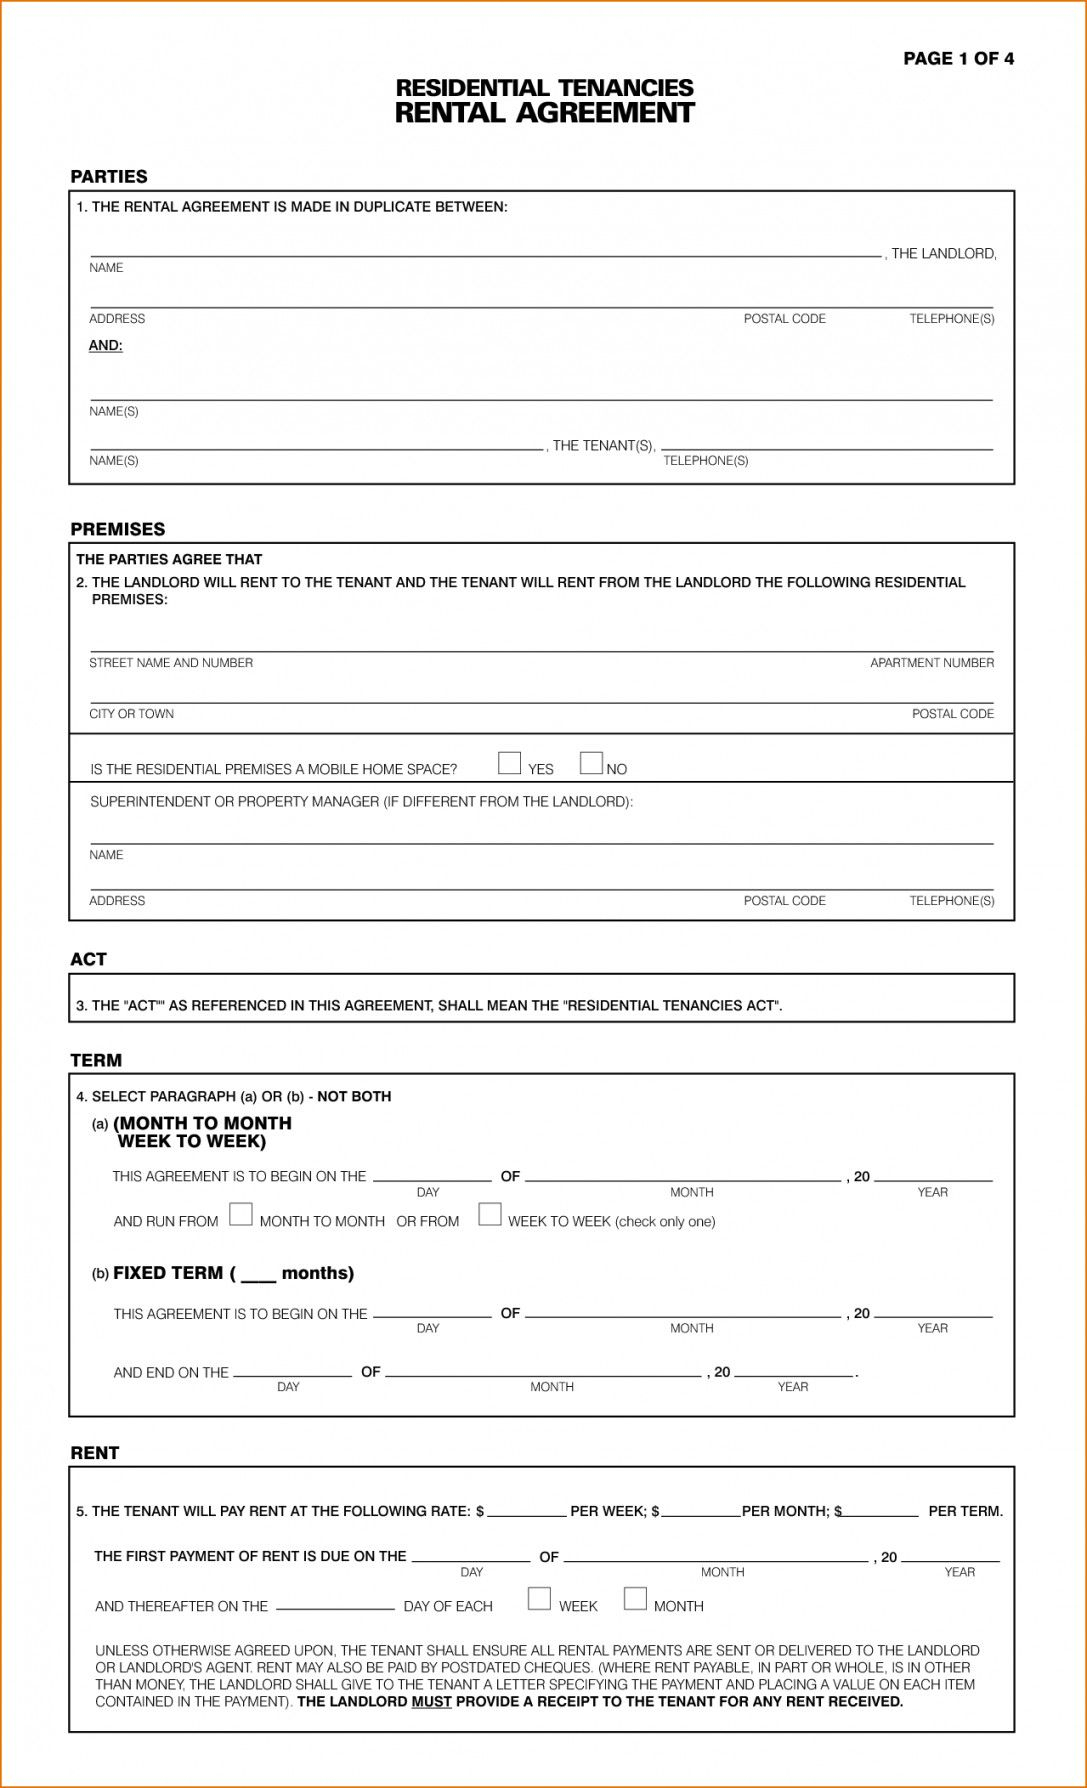 Rental Agreement Template Free Download | Lostranquillos - Rental Agreement Forms Free Printable